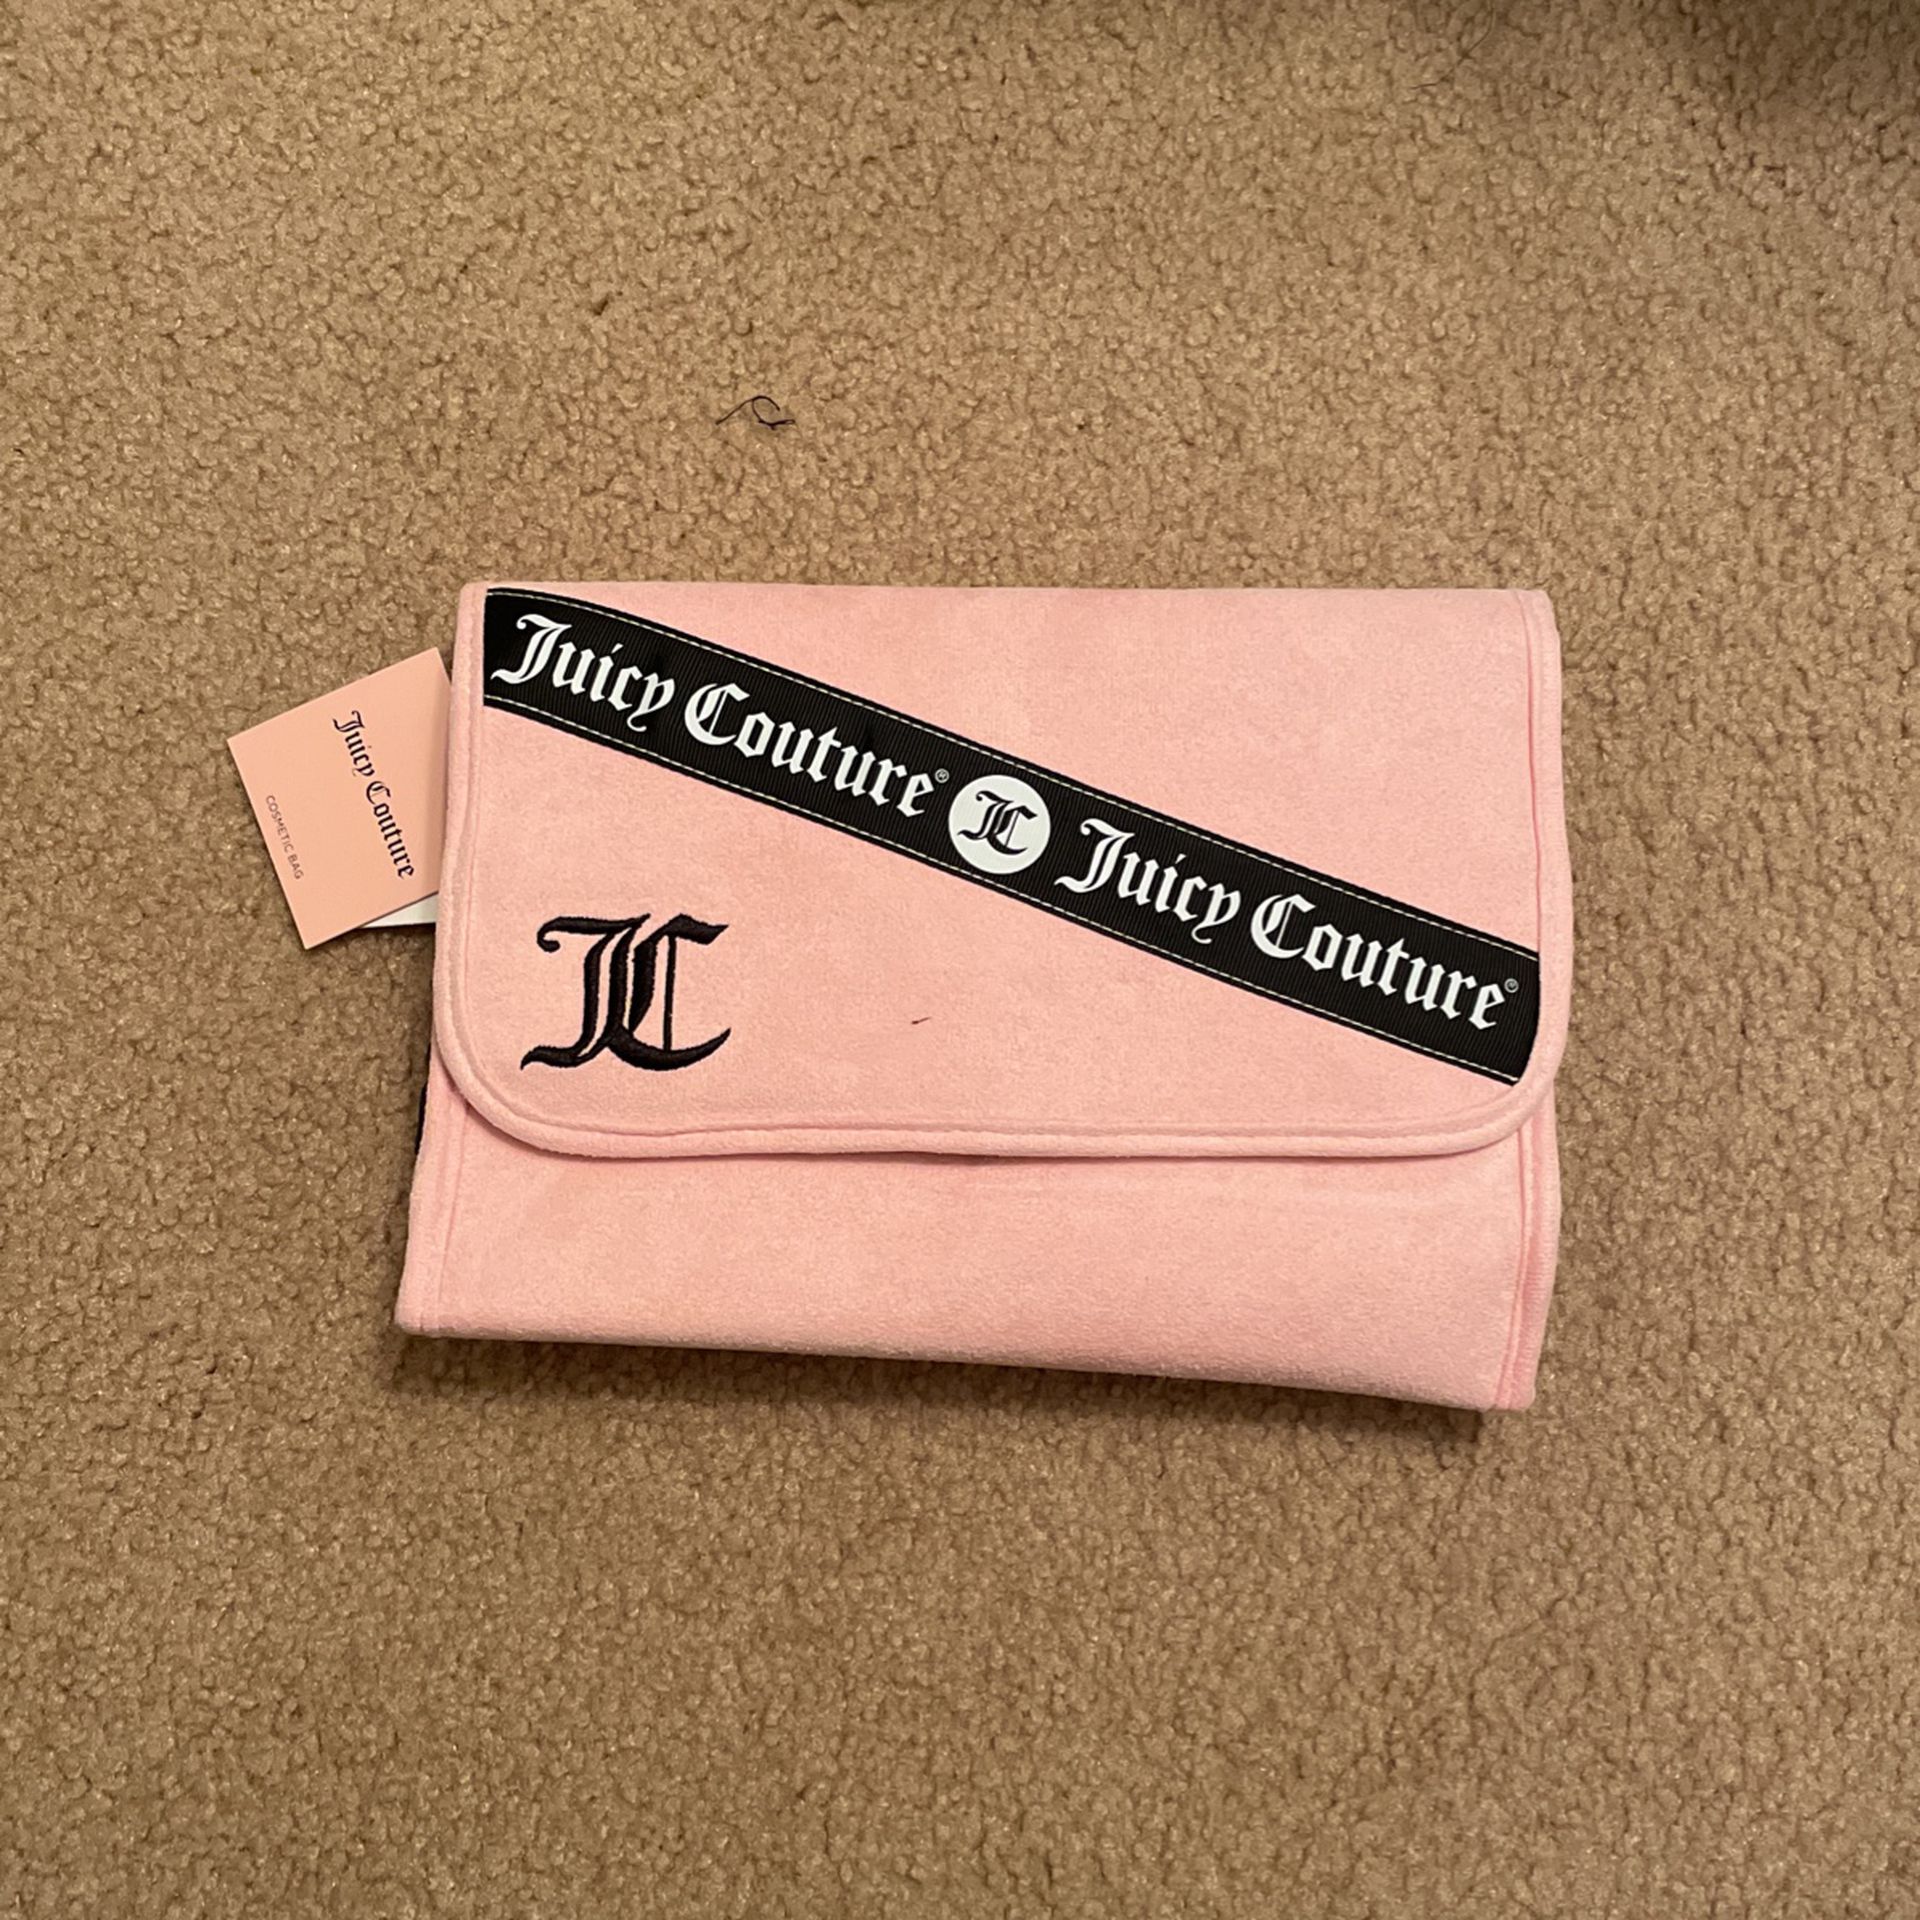 Juicy Couture Toiletry Bag 